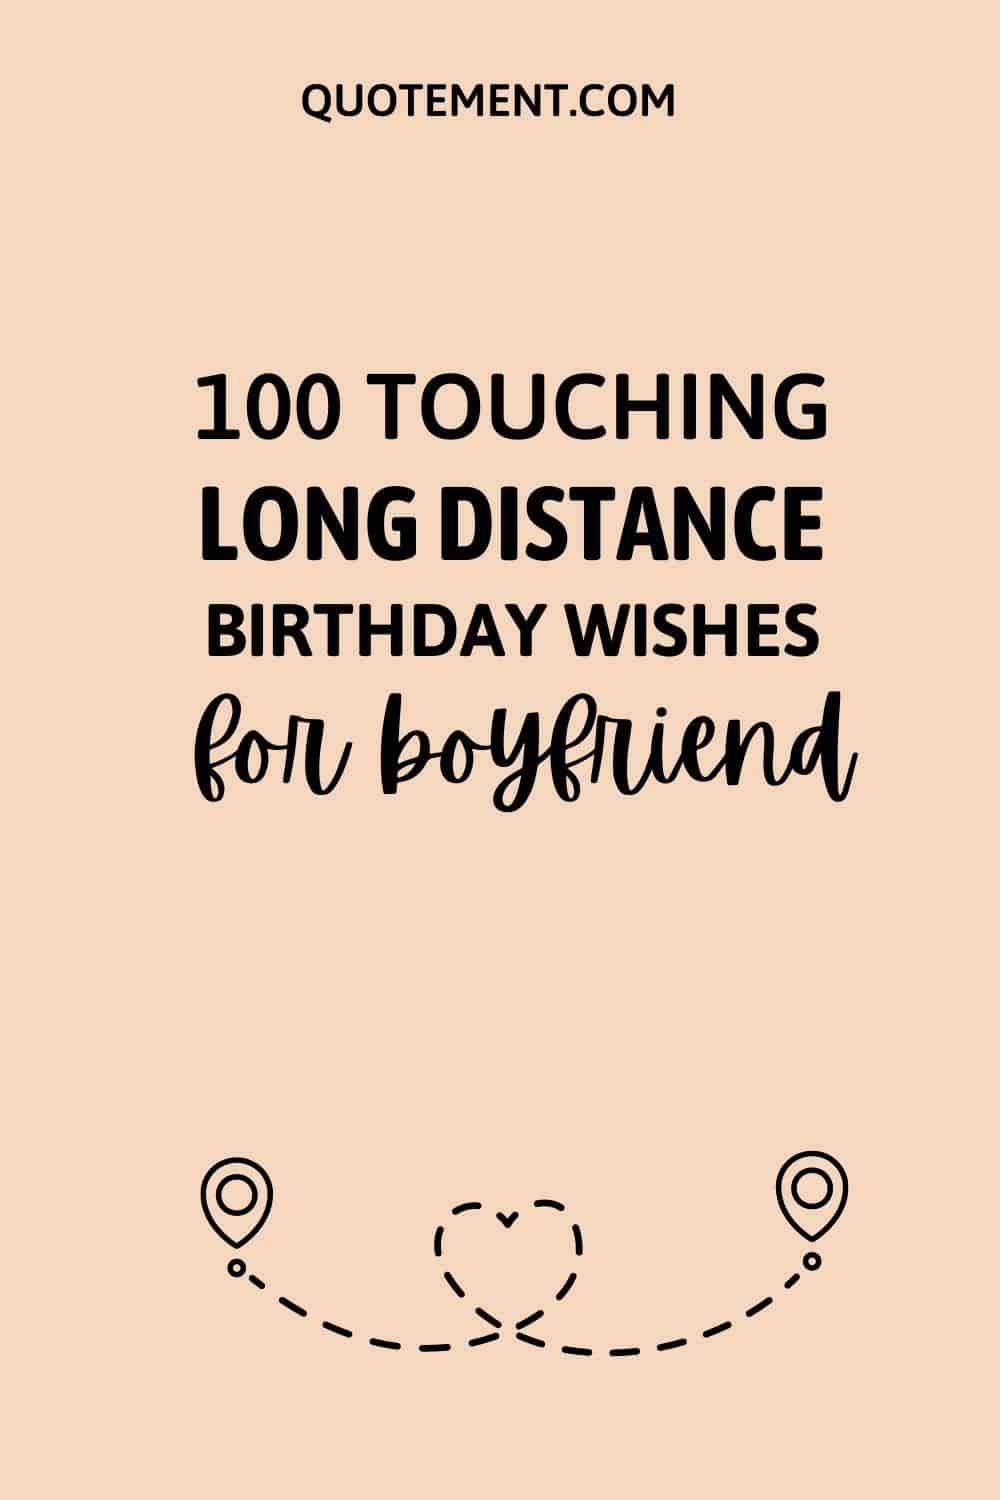 100 Touching Long Distance Birthday Wishes For Boyfriend
